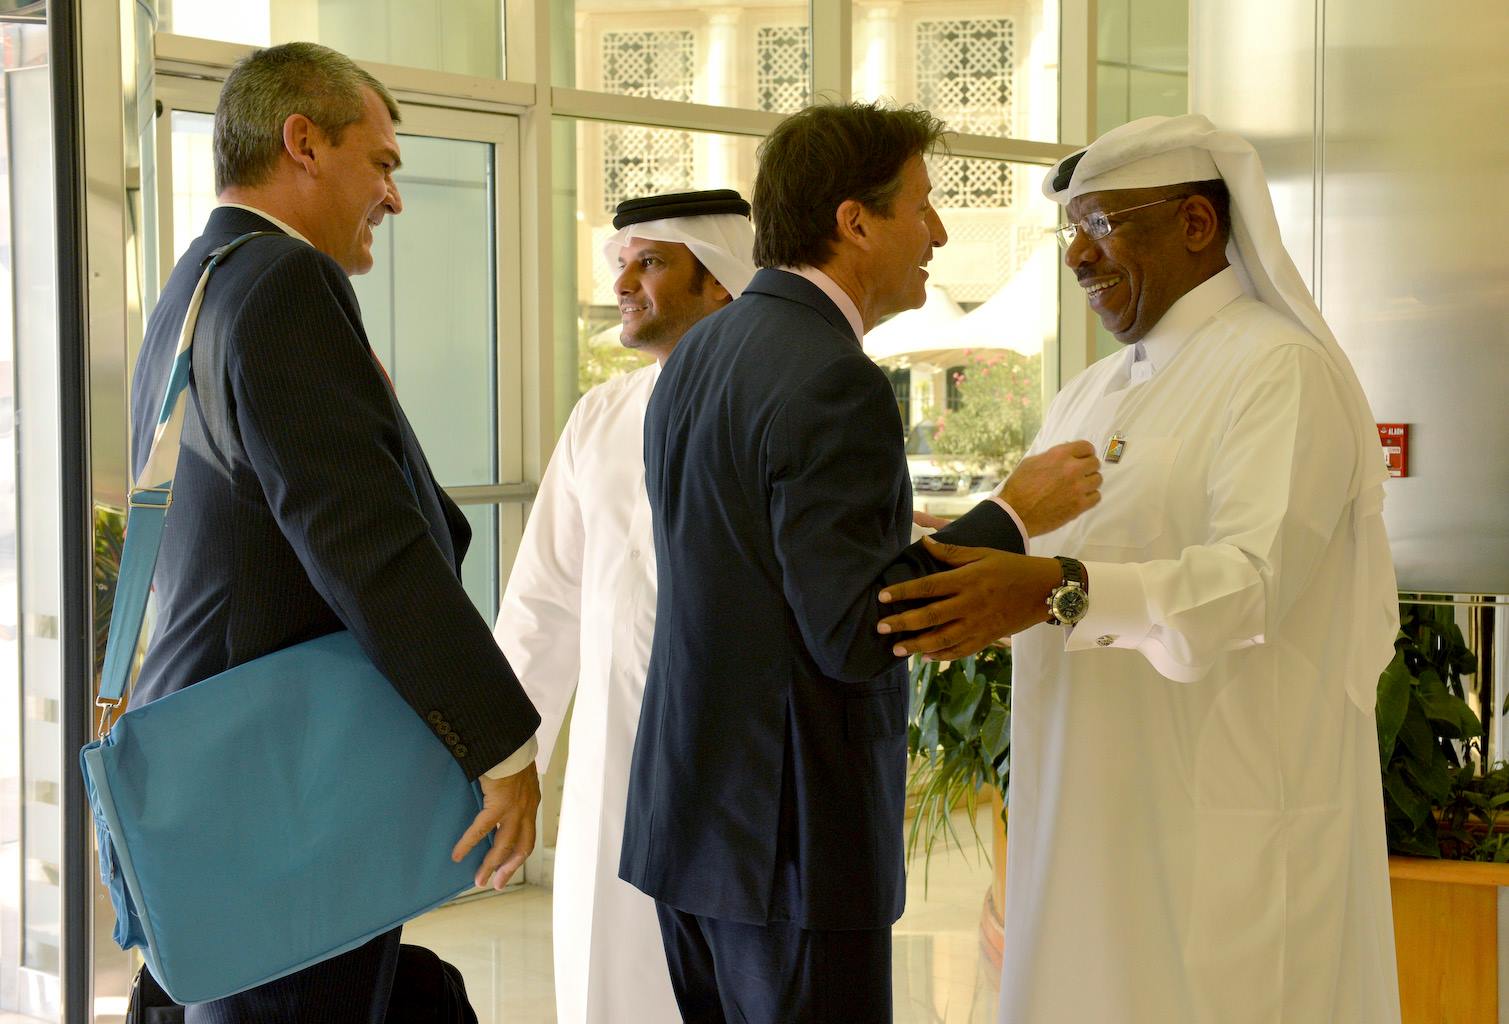 IAAF Evaluation Commission chairman Sebastian Coe praised Doha's bid to host the 2019 World Championships and the wider benefits it potentially offers the region ©Doha 2019